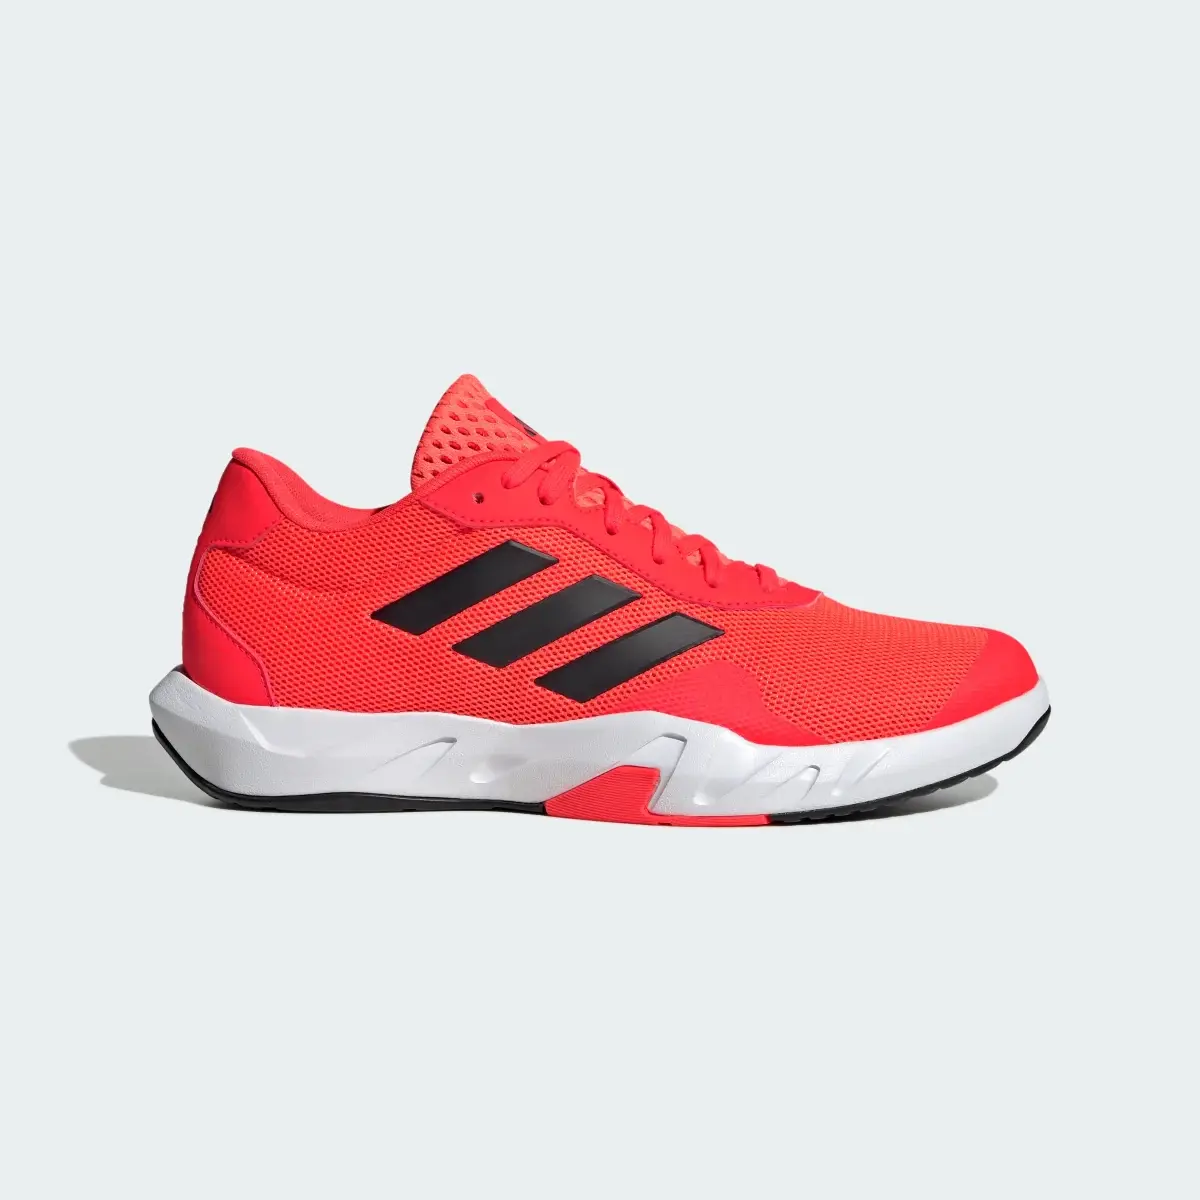 Adidas Amplimove Trainer Shoes. 2